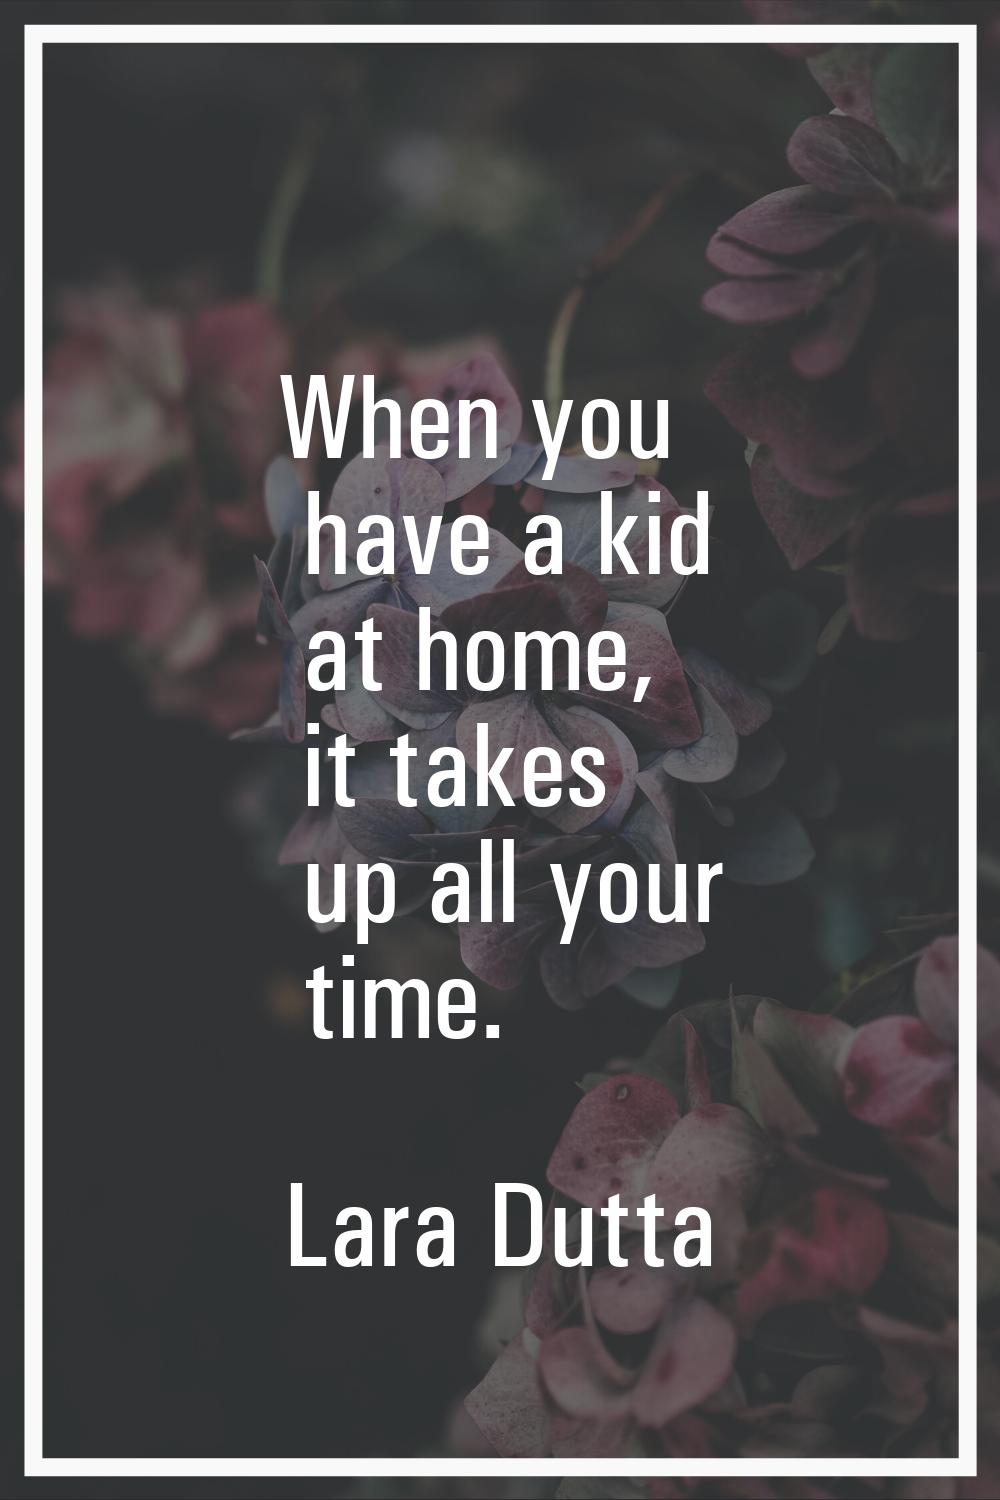 When you have a kid at home, it takes up all your time.